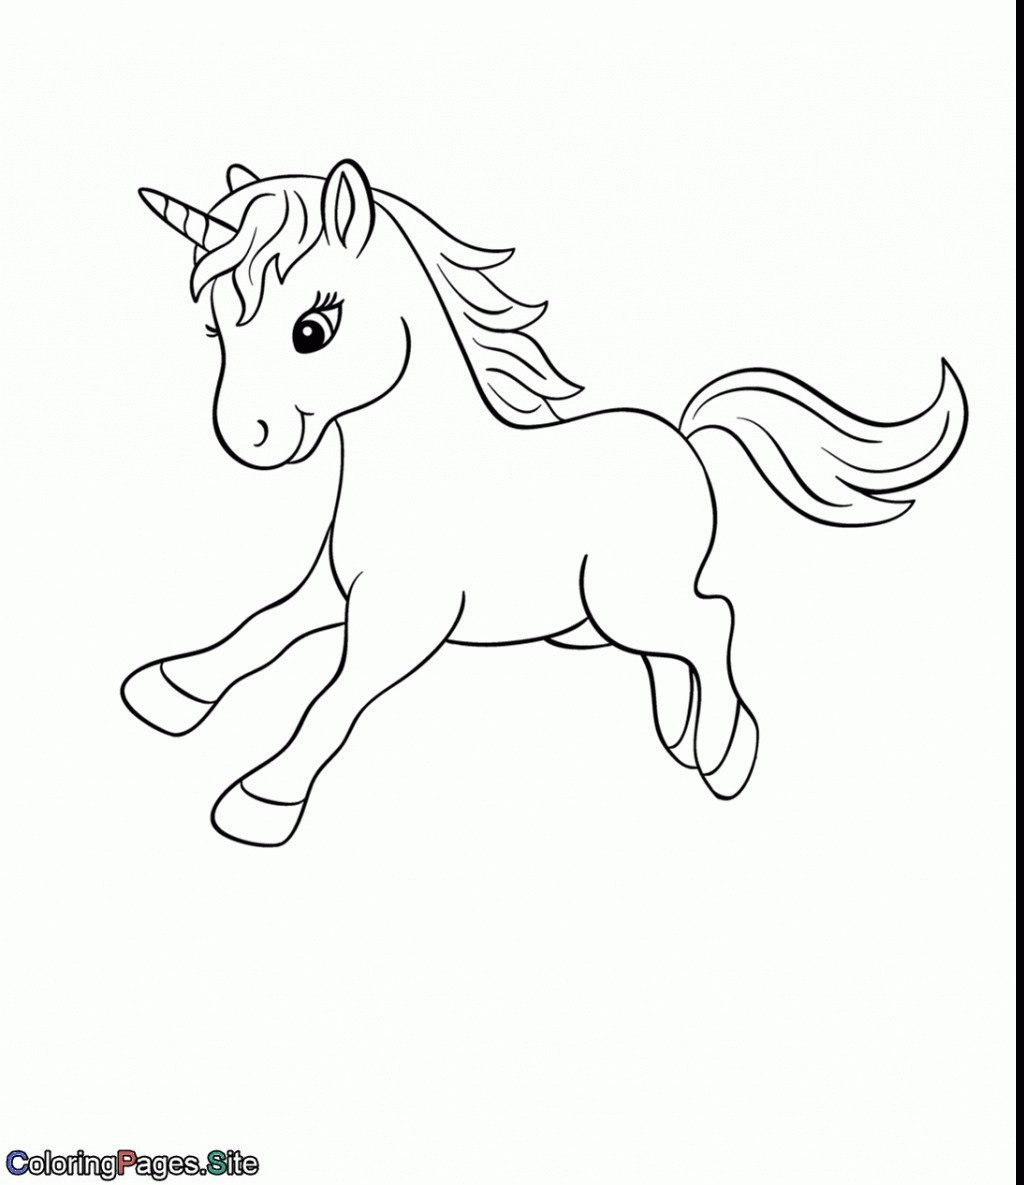 Unicorno Coloring Pages Coloring Pages Printable Unicorn Coloring Pages Games With Cute